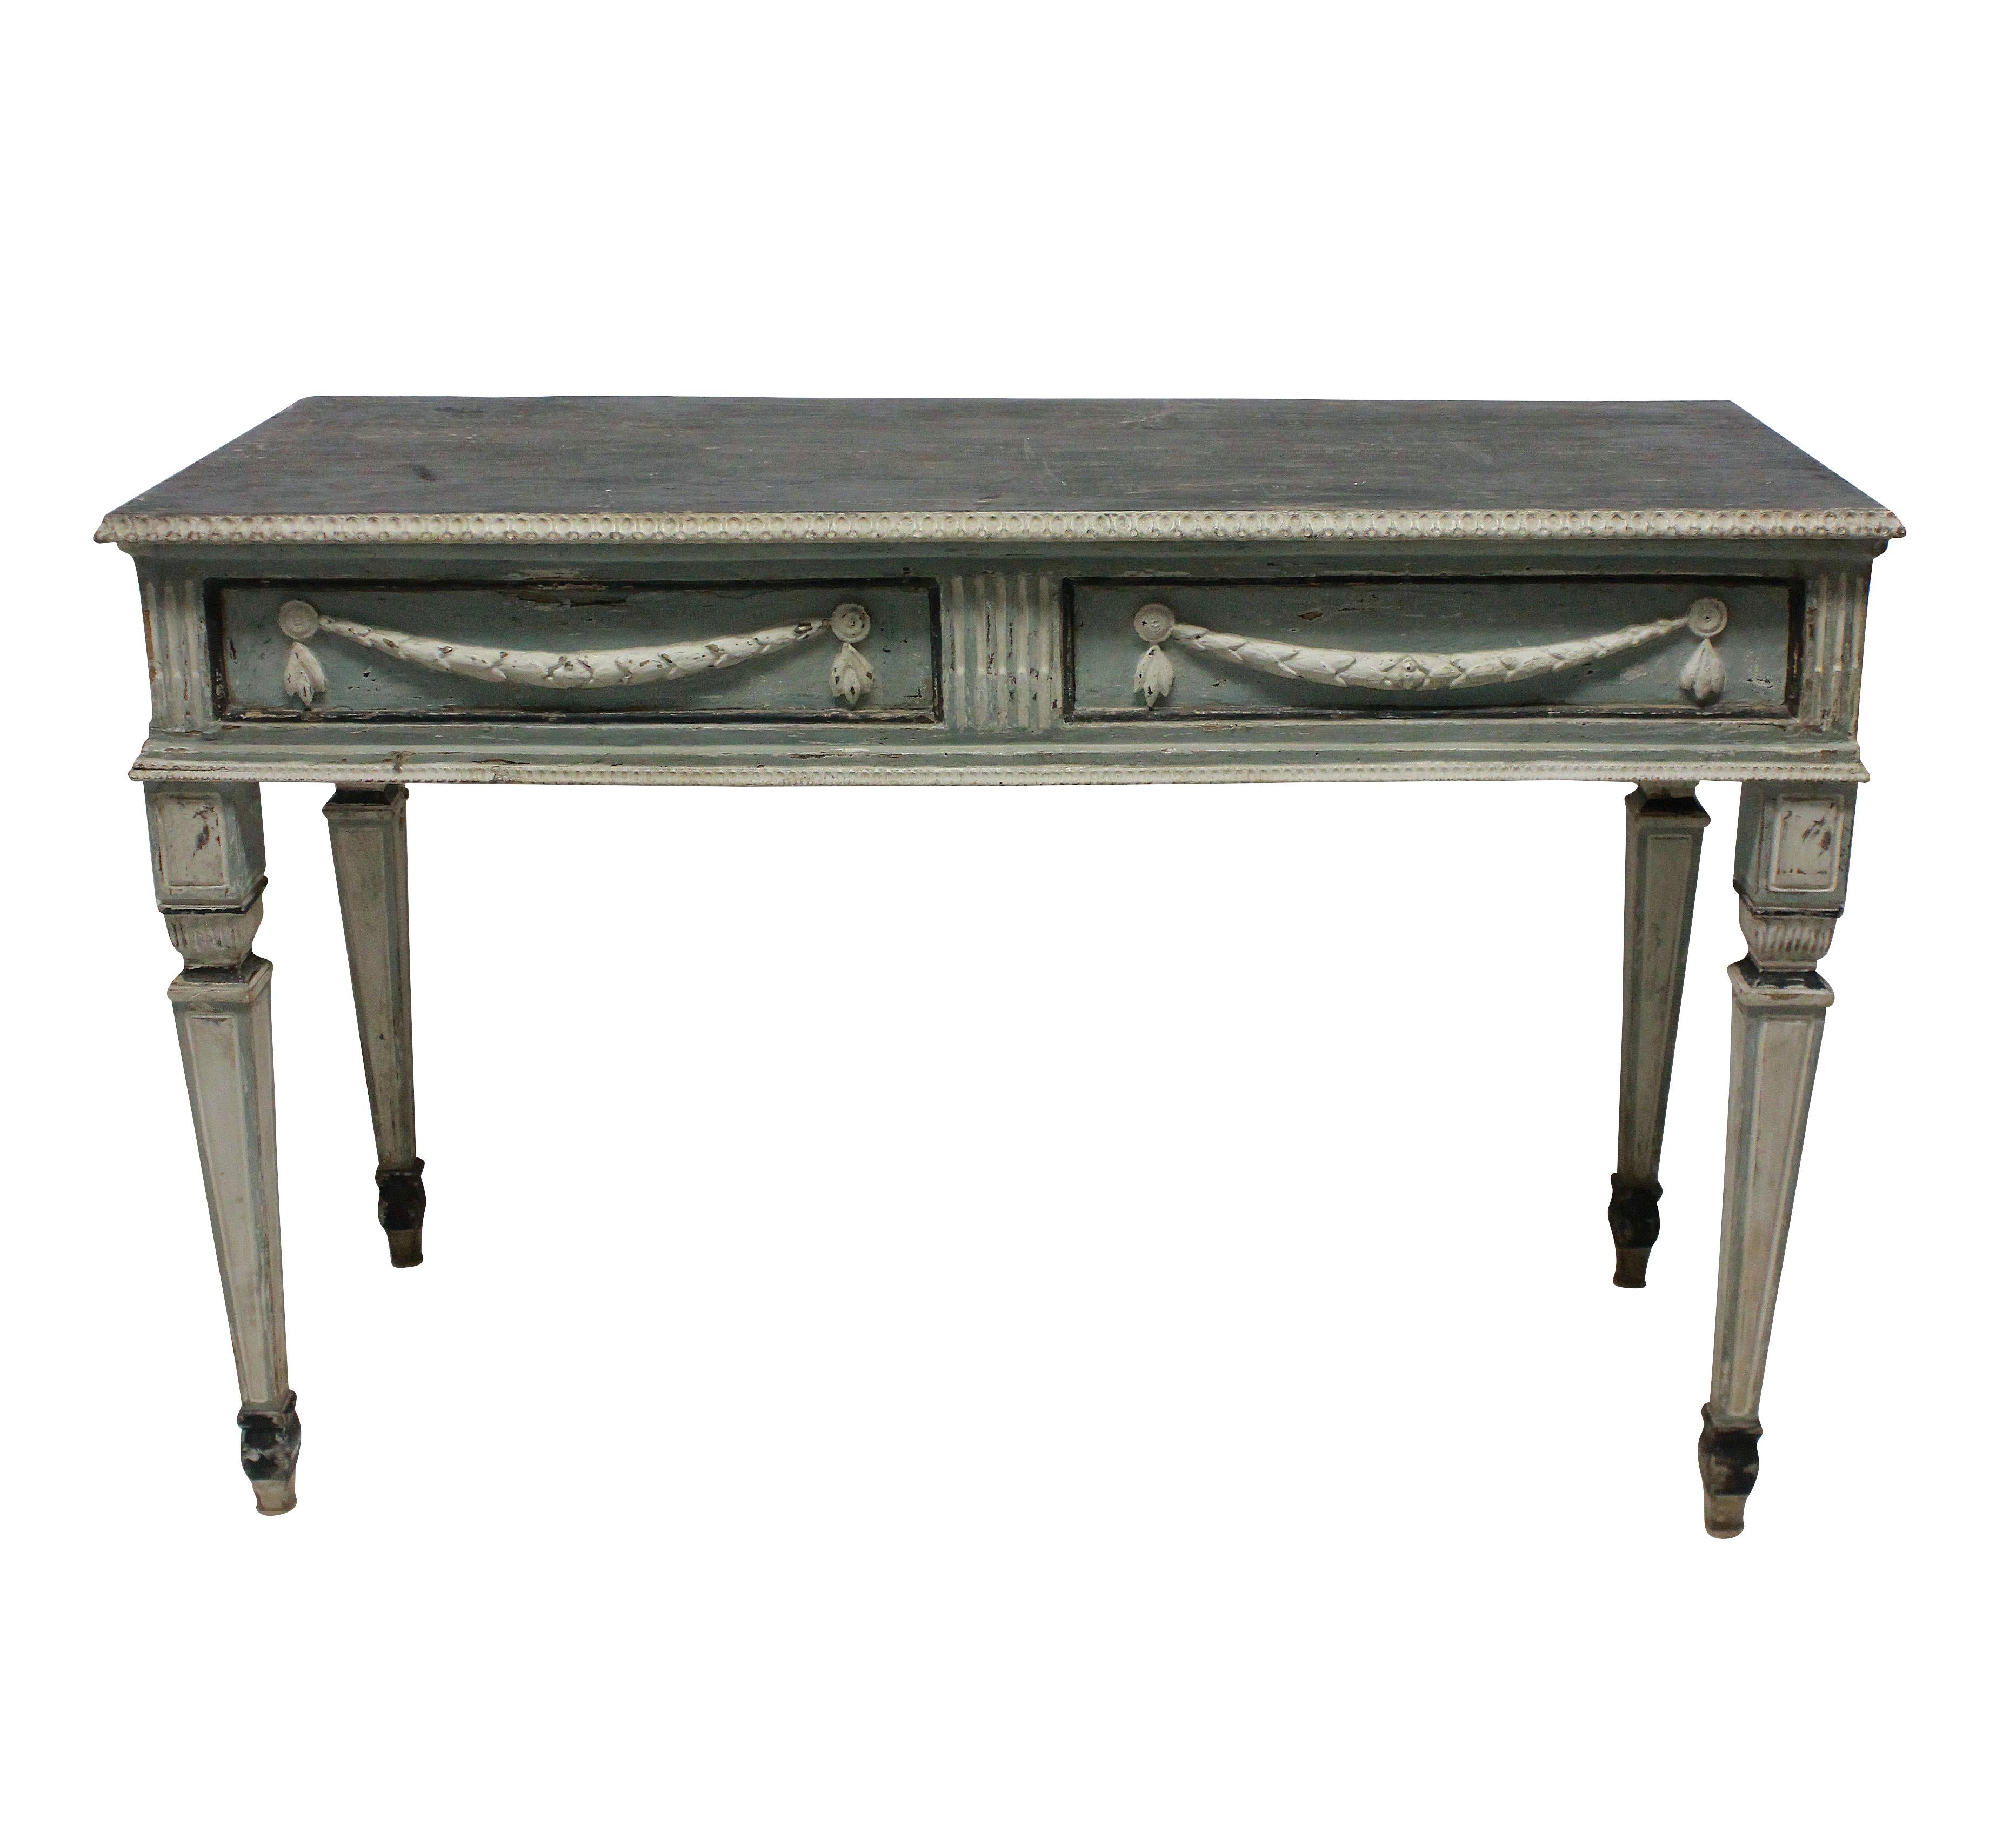 A pair of large scale Swedish 18th century console tables in the neoclassical taste. All of the paint is original and the colors are beautifully subtle.